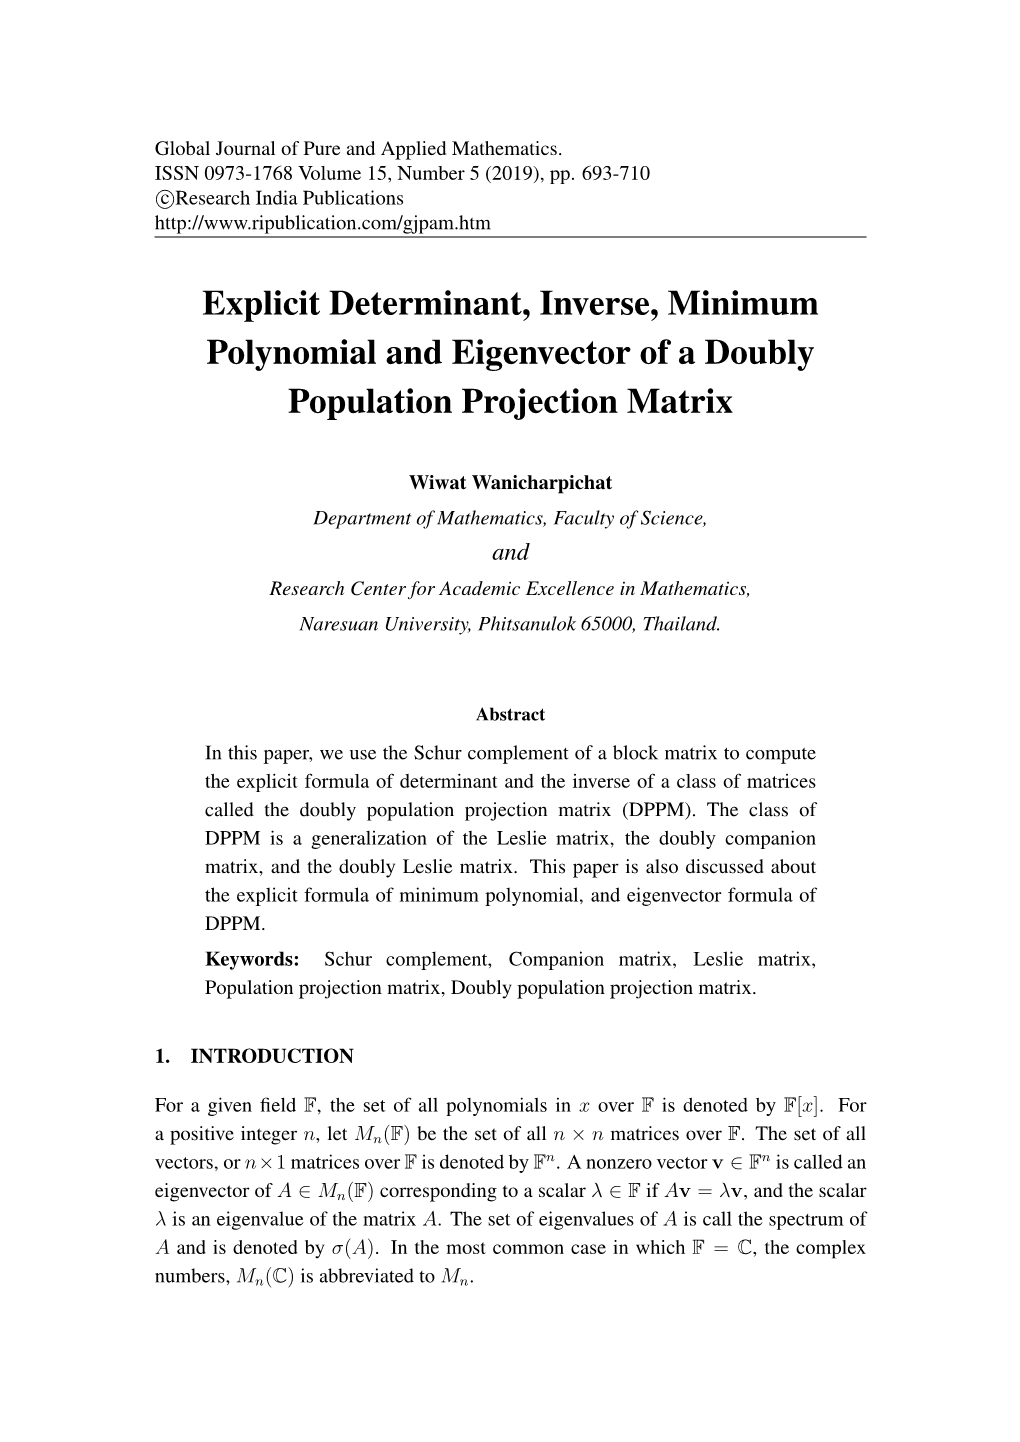 Explicit Determinant, Inverse, Minimum Polynomial and Eigenvector of a Doubly Population Projection Matrix